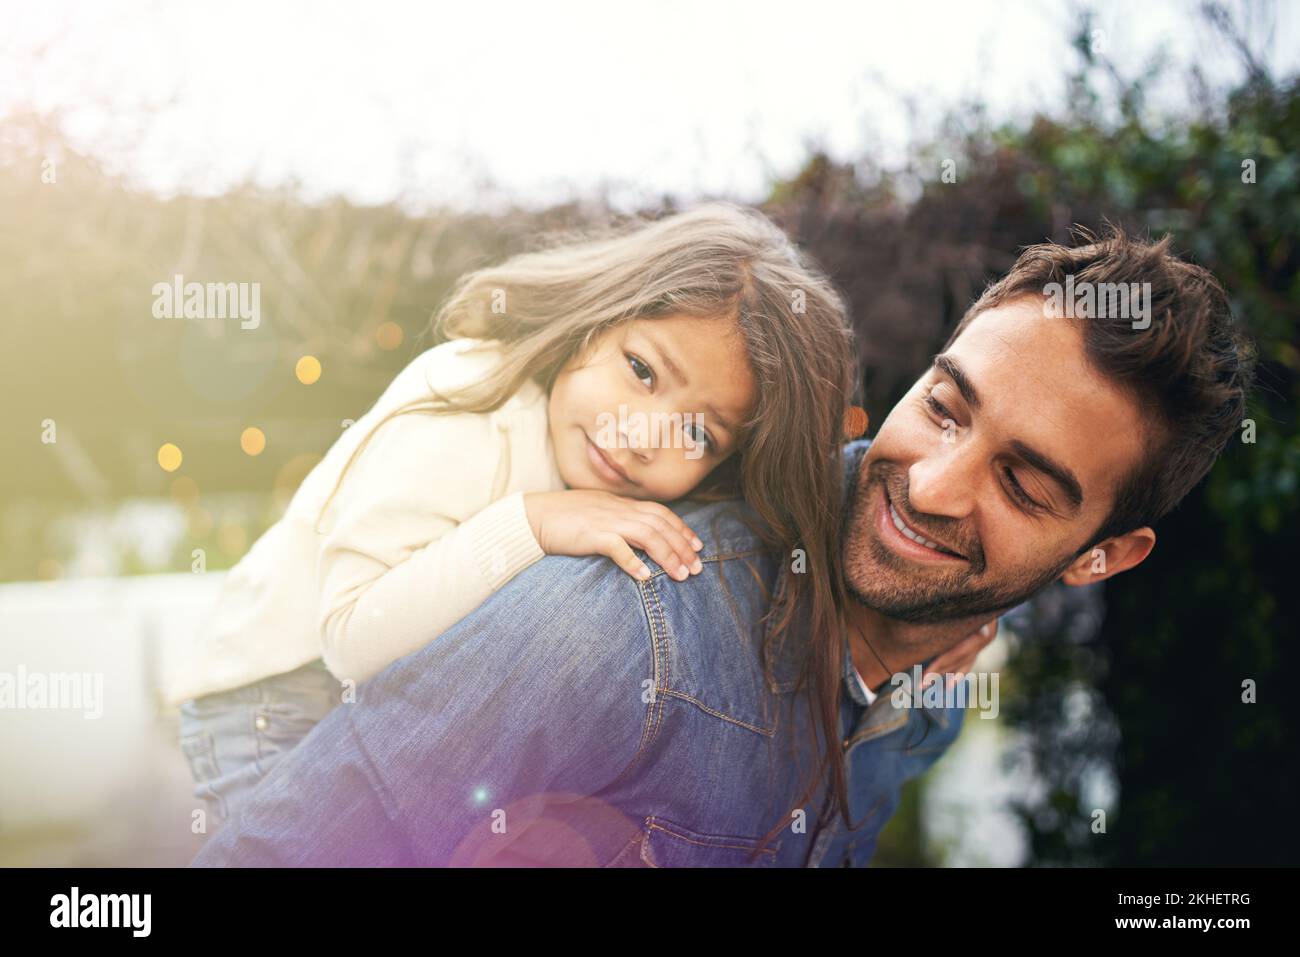 Daddy devotion. a little girl and her father playing together outdoors. Stock Photo